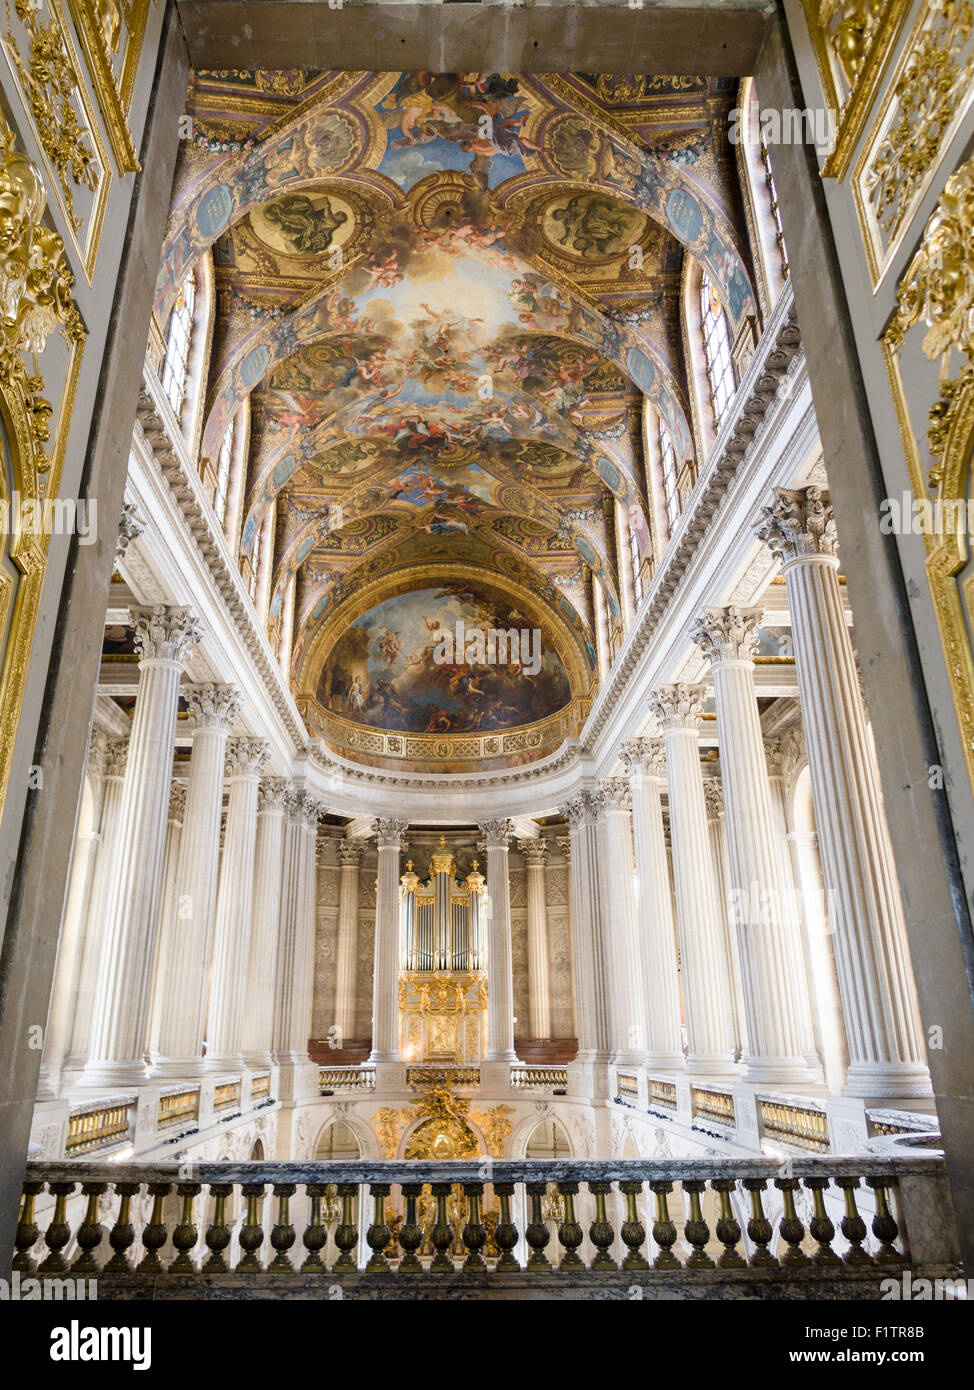 Chapel at Versailles: Entrance and Ceiling. The ornate chapel emphsizing the ceiling and the second floor balcony. Palace of Ver Stock Photo